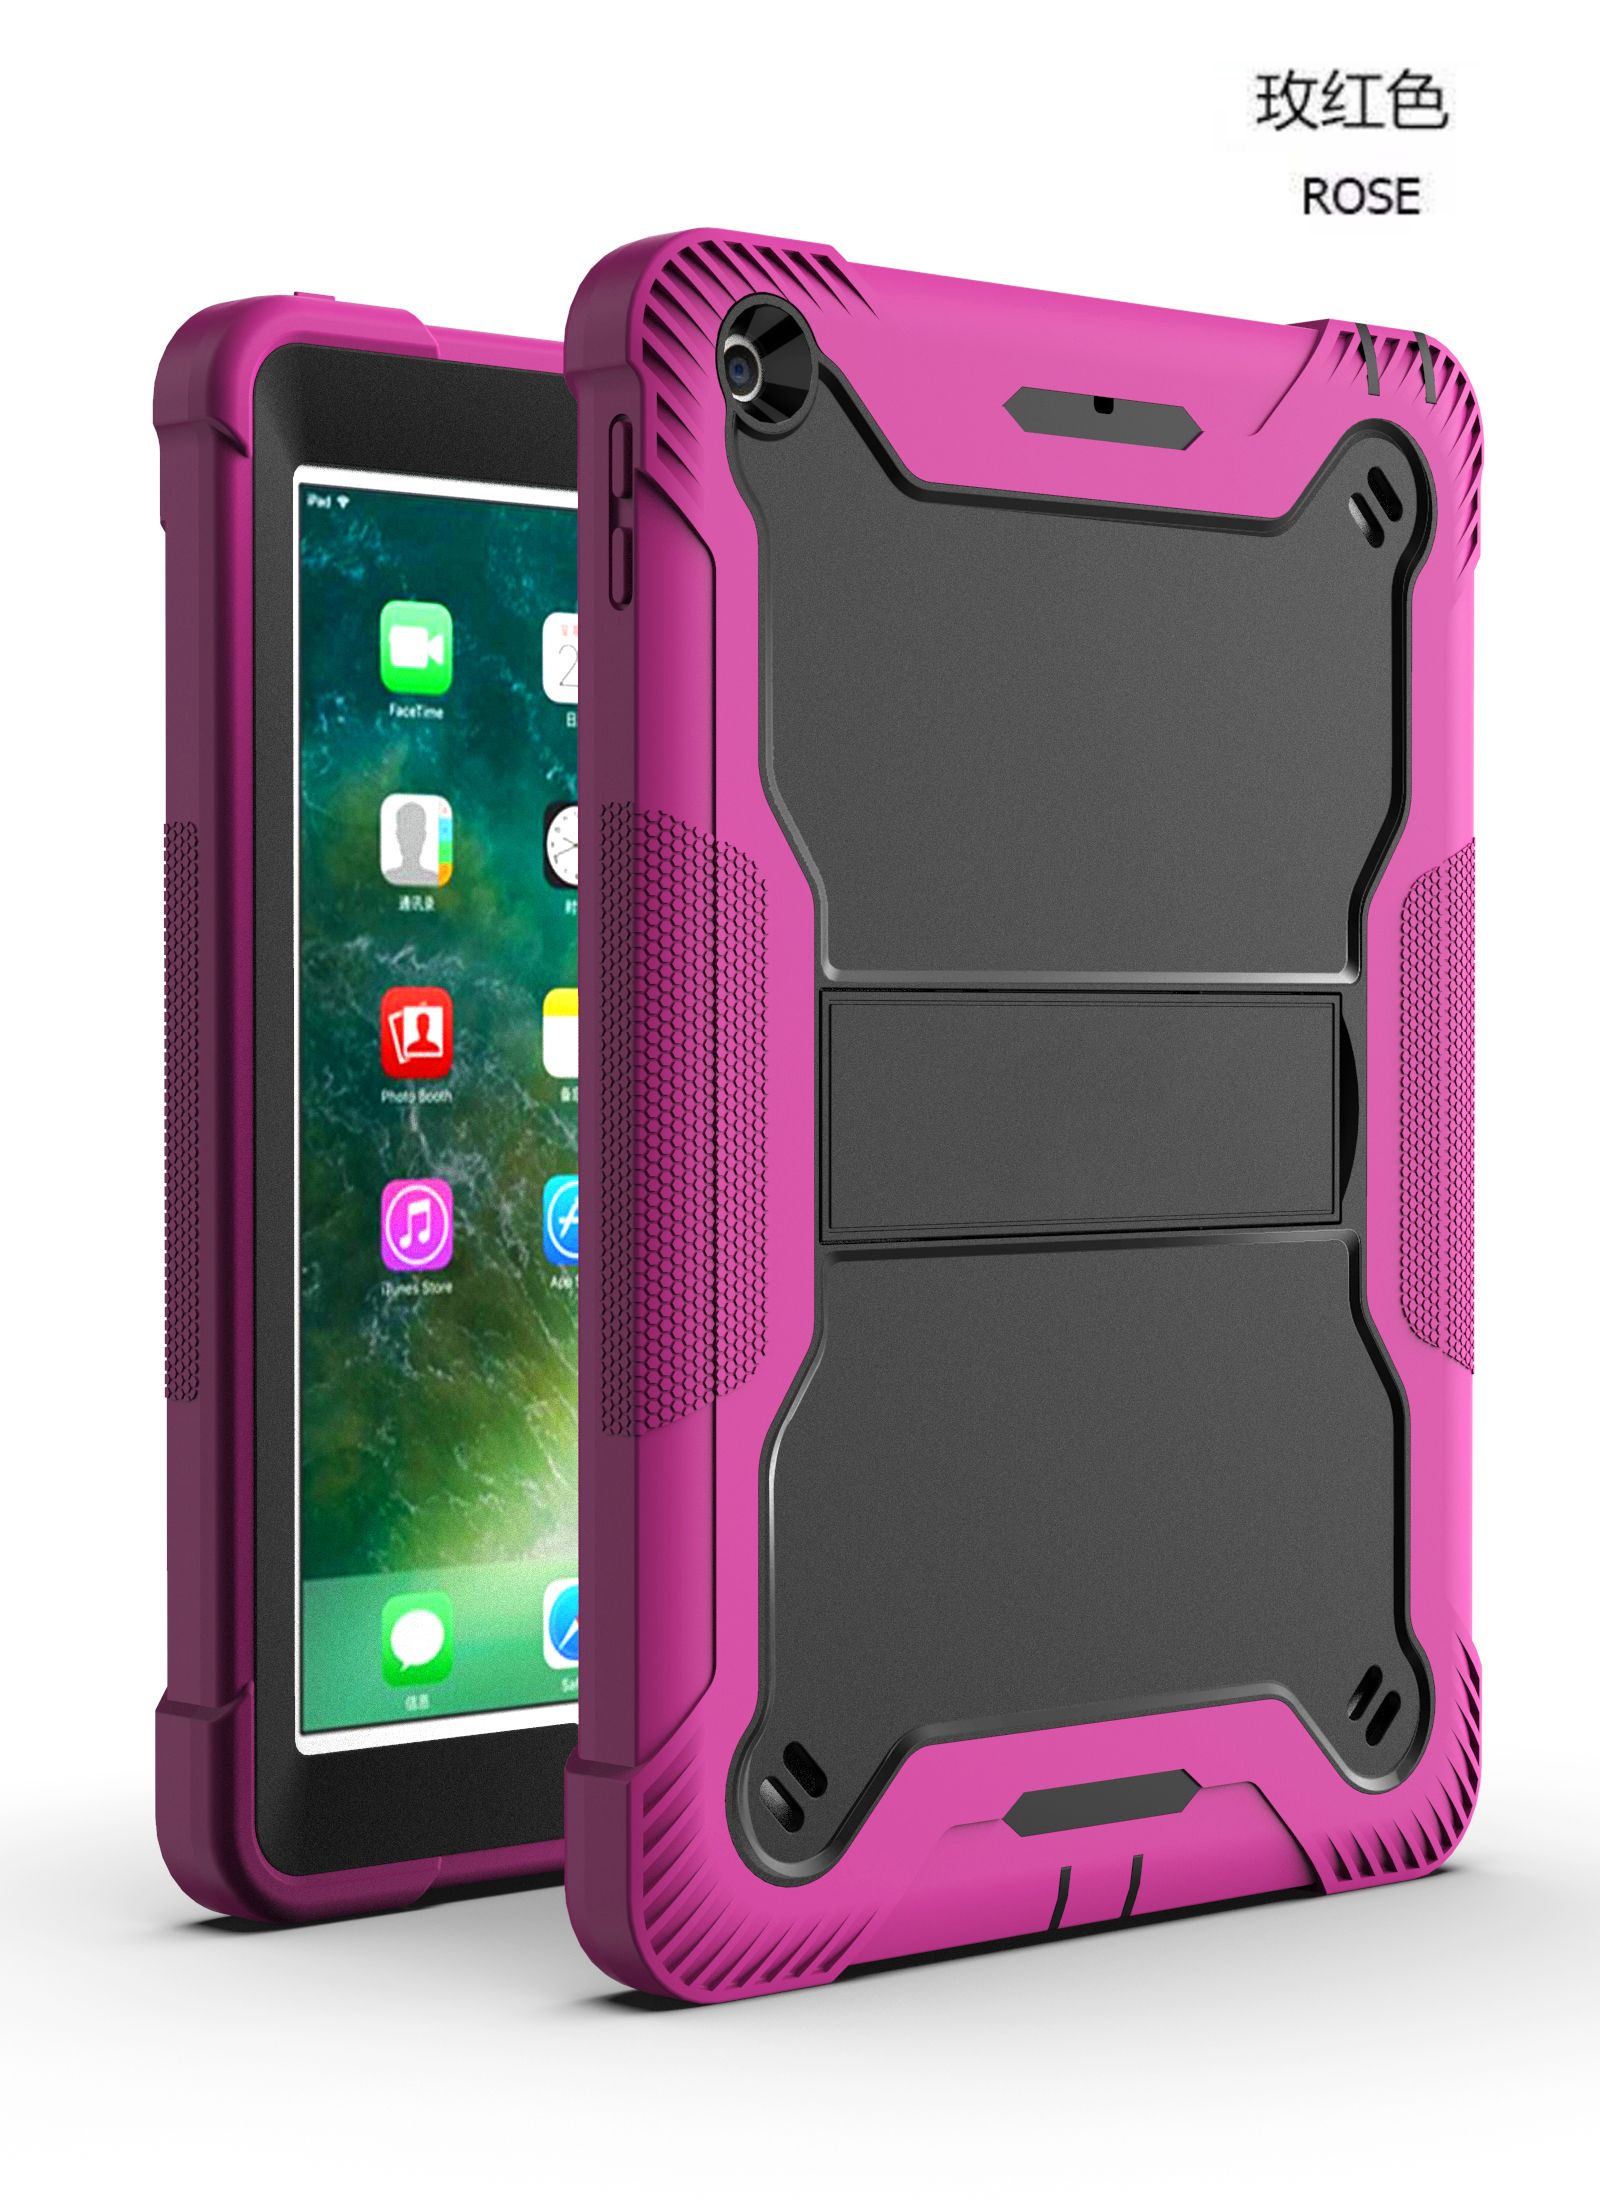 Kickstand 8 Inch Tablet Case Cover For Ipad 2 3 4 TCL Tablet 10 5G Tab 8 4G  N9132 Heavy Duty 3 Layers Multi Functional Protection Tablet Acessories PC  And Silicone Material From Buildincase, $6.9